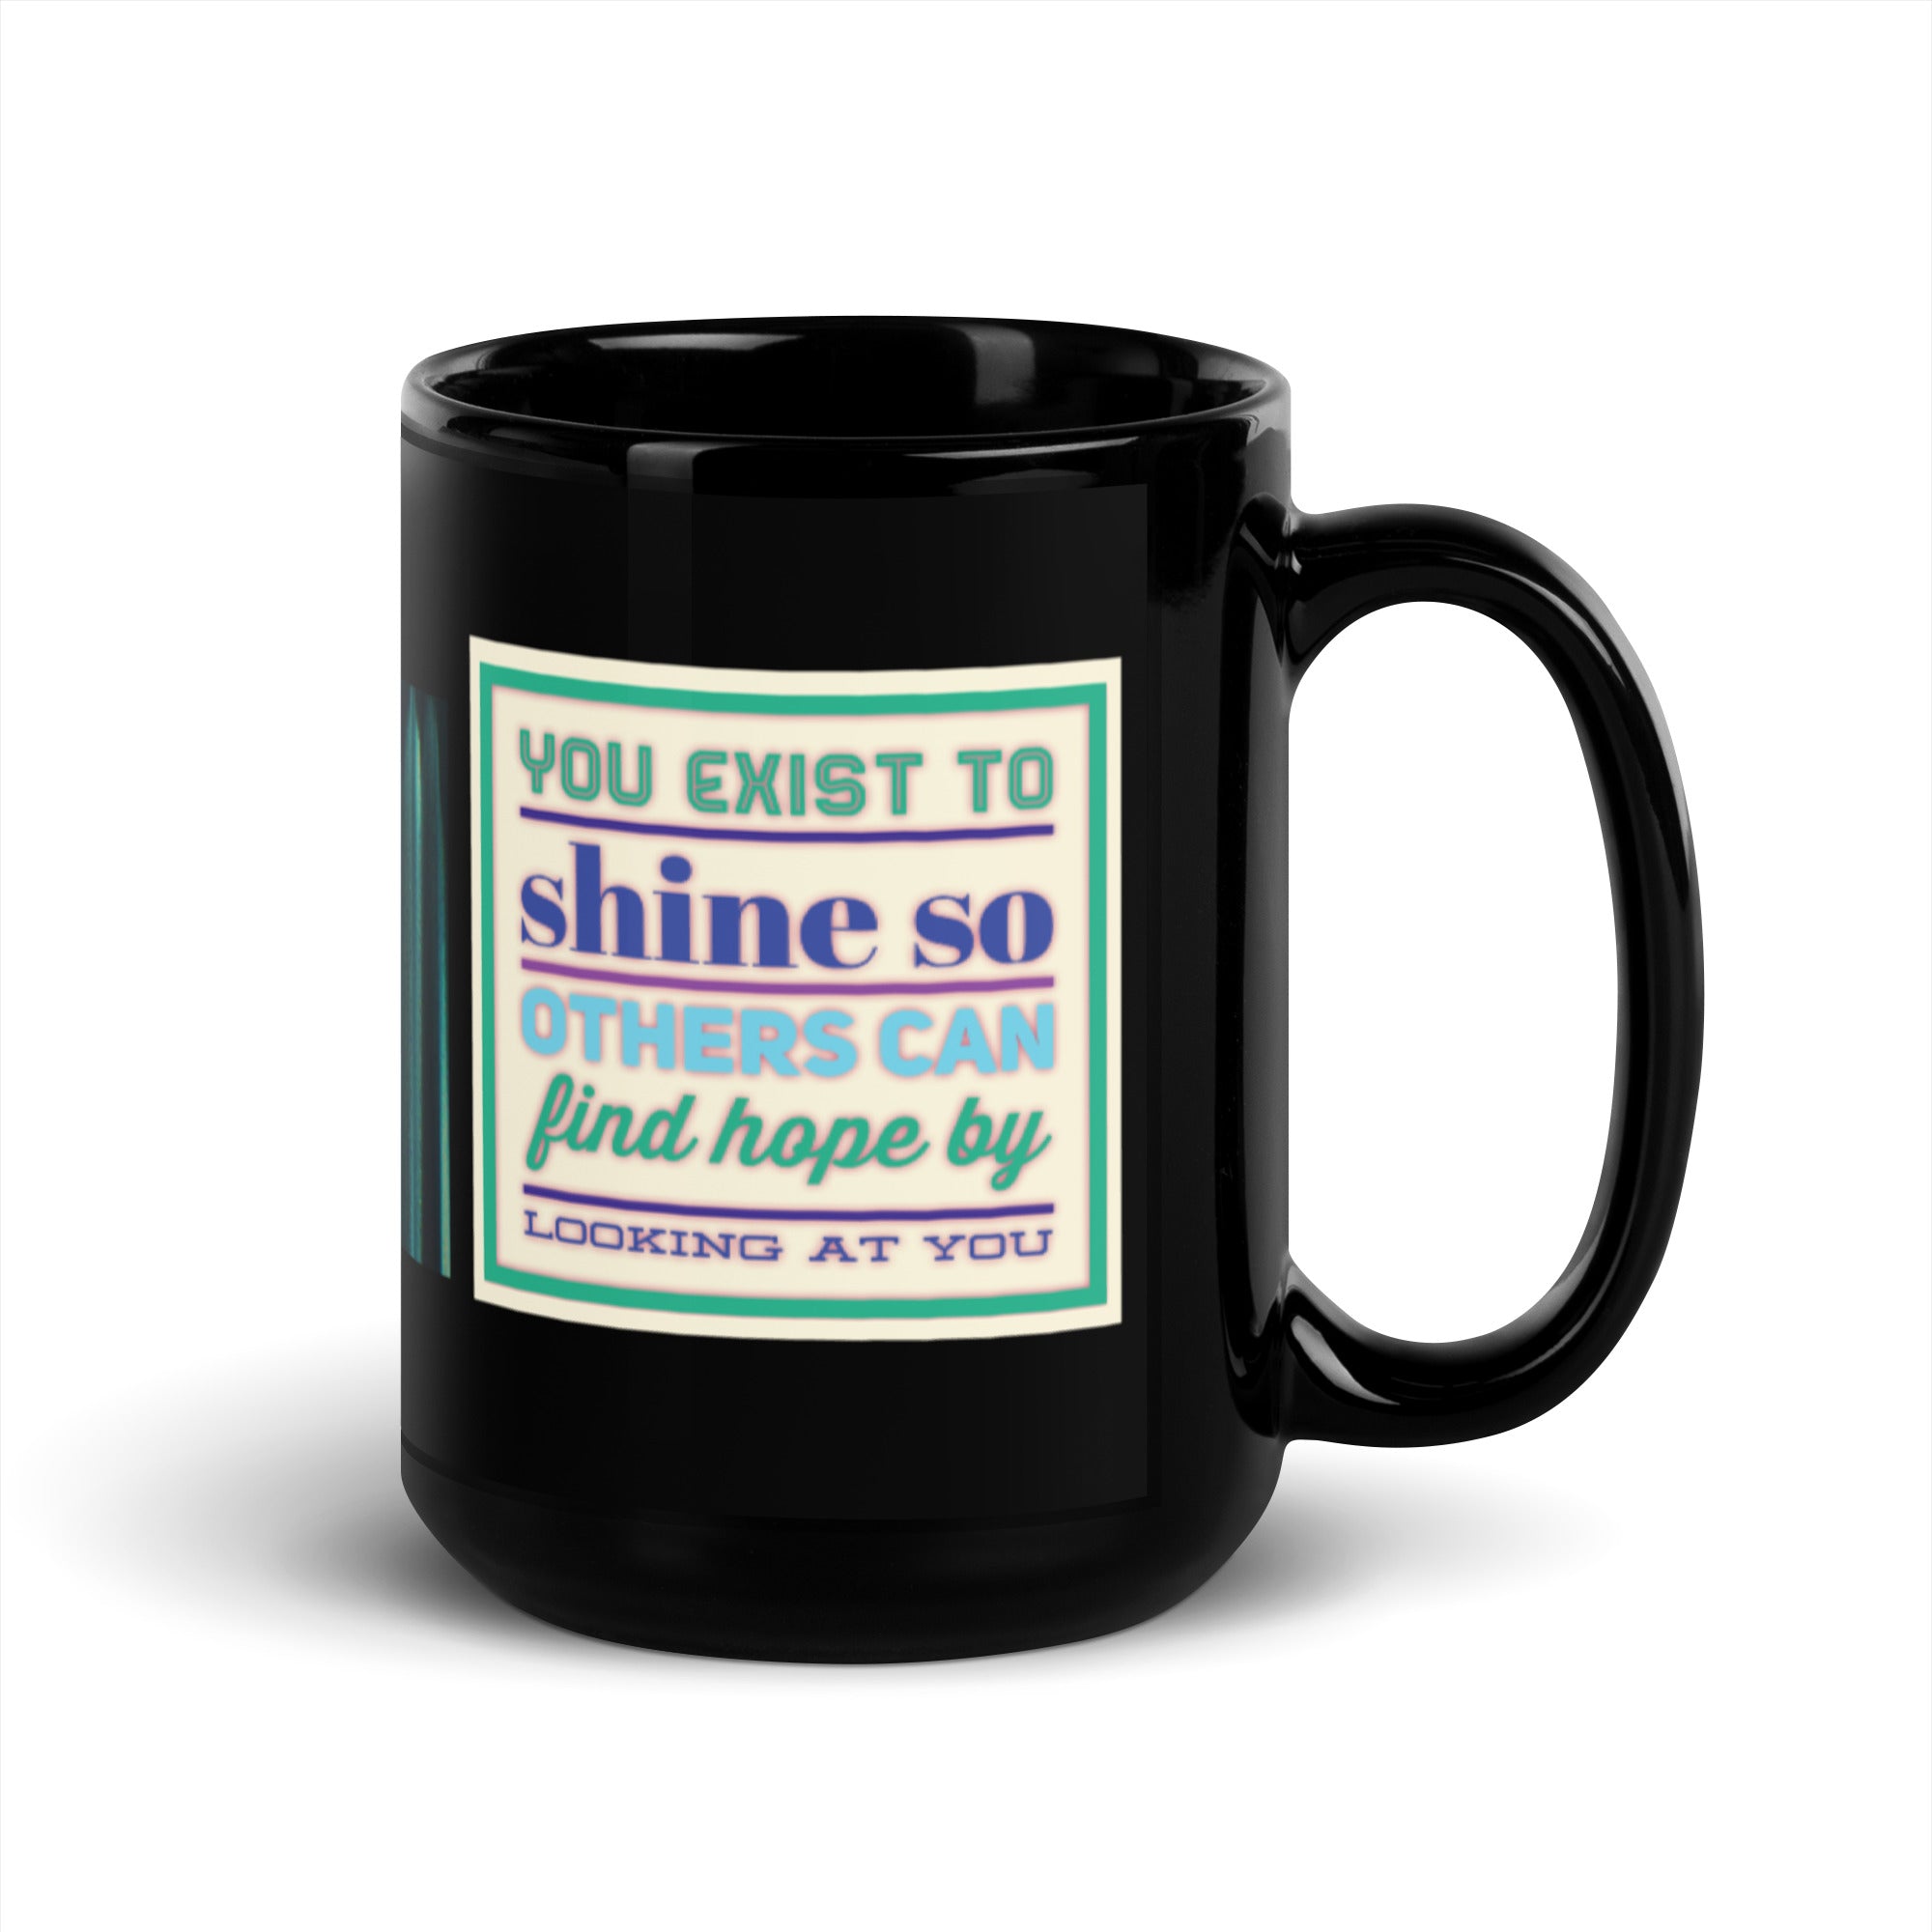 GloWell Designs - Black Glossy Mug - Motivational Quote - You Exist to Shine - GloWell Designs